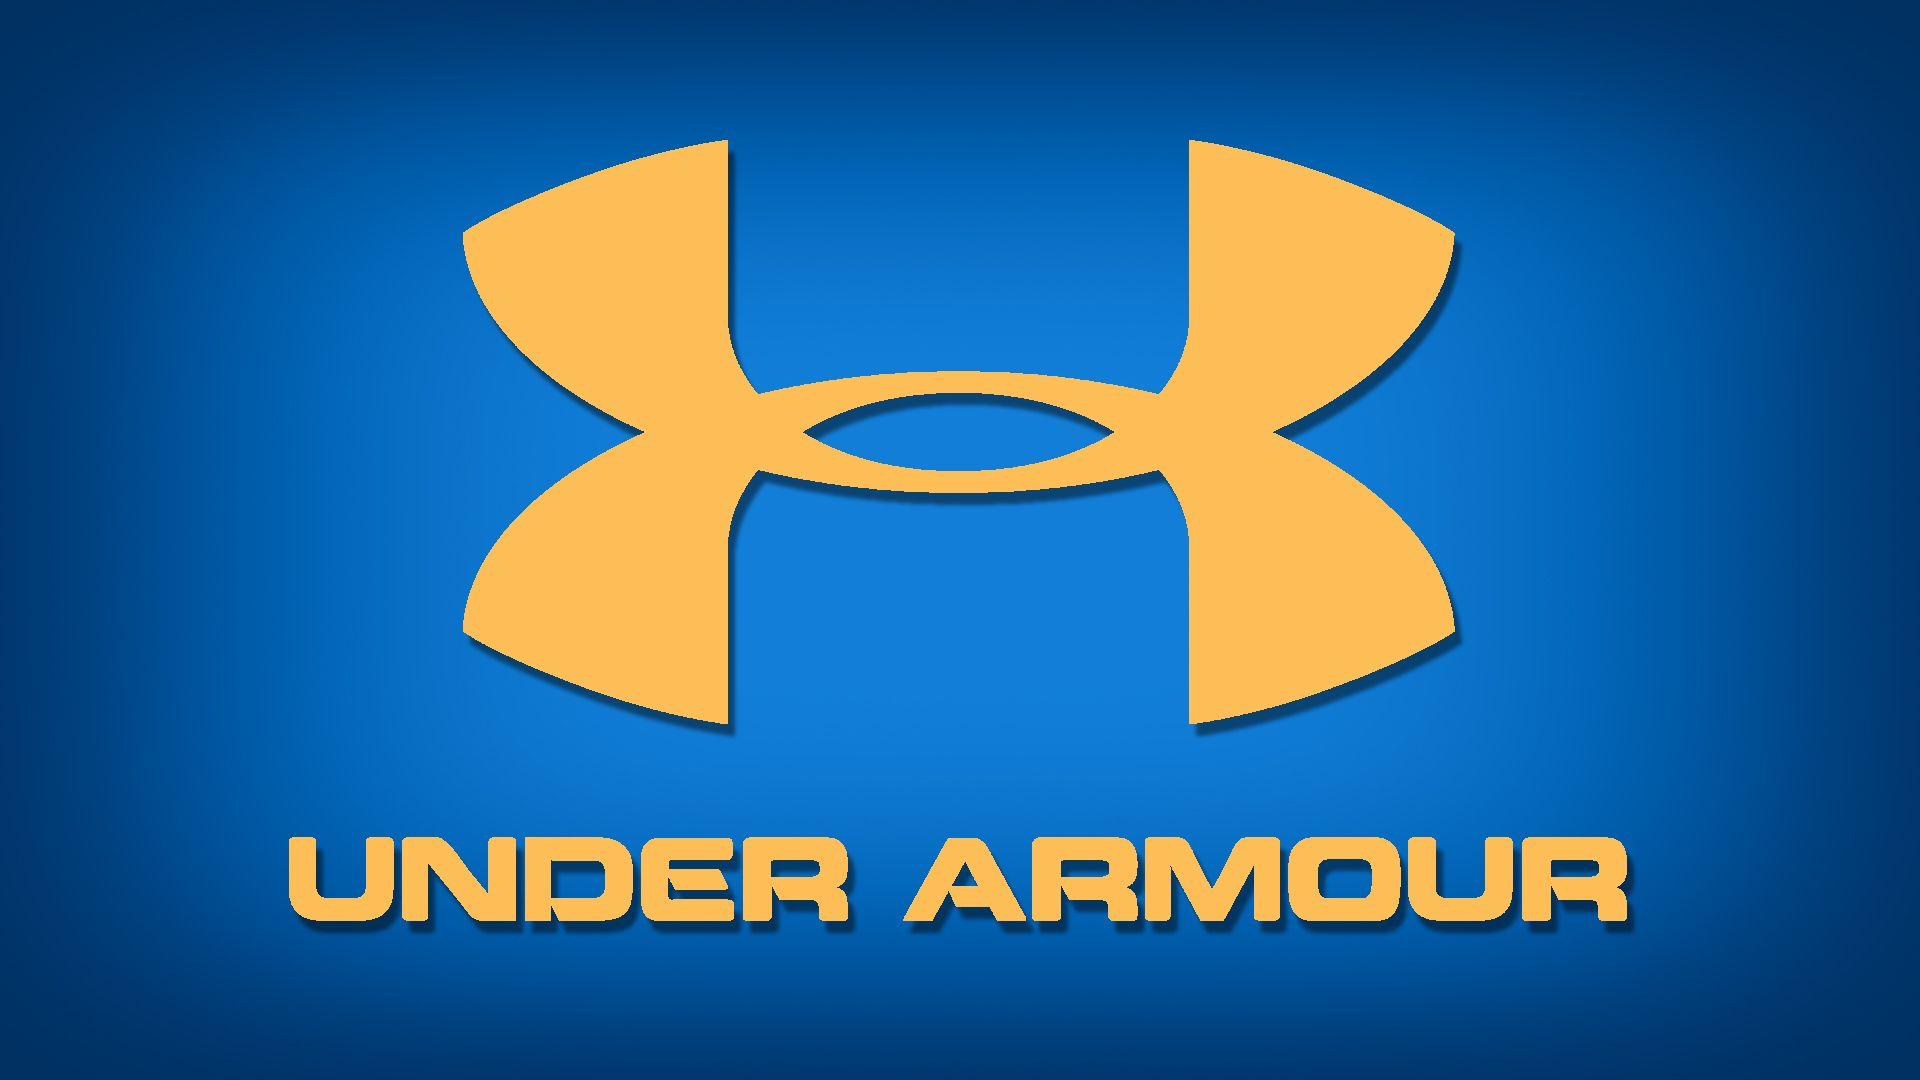 Earnings and sales estimates of Under Armour tops: Shares fall